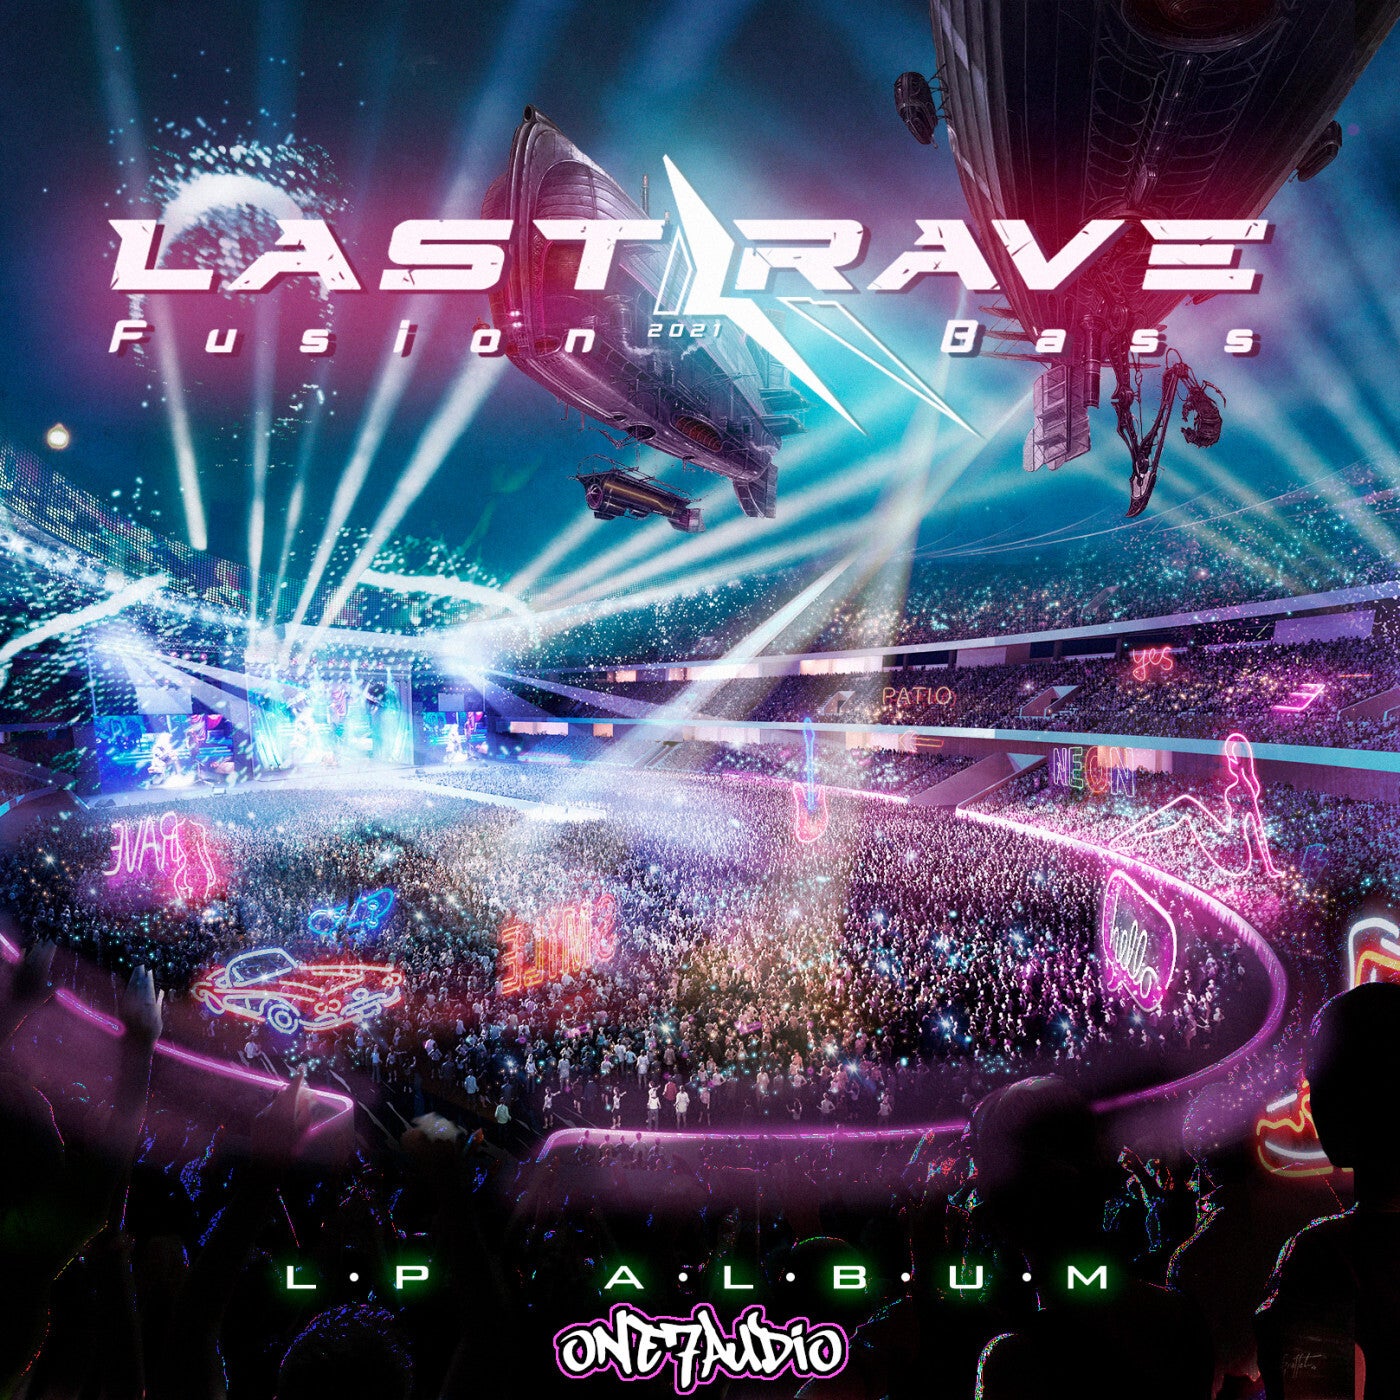 Зе ласт рейв. Rave Fusion. The last Rave. Last Rave Ромпа. Ласт рейв Слава.